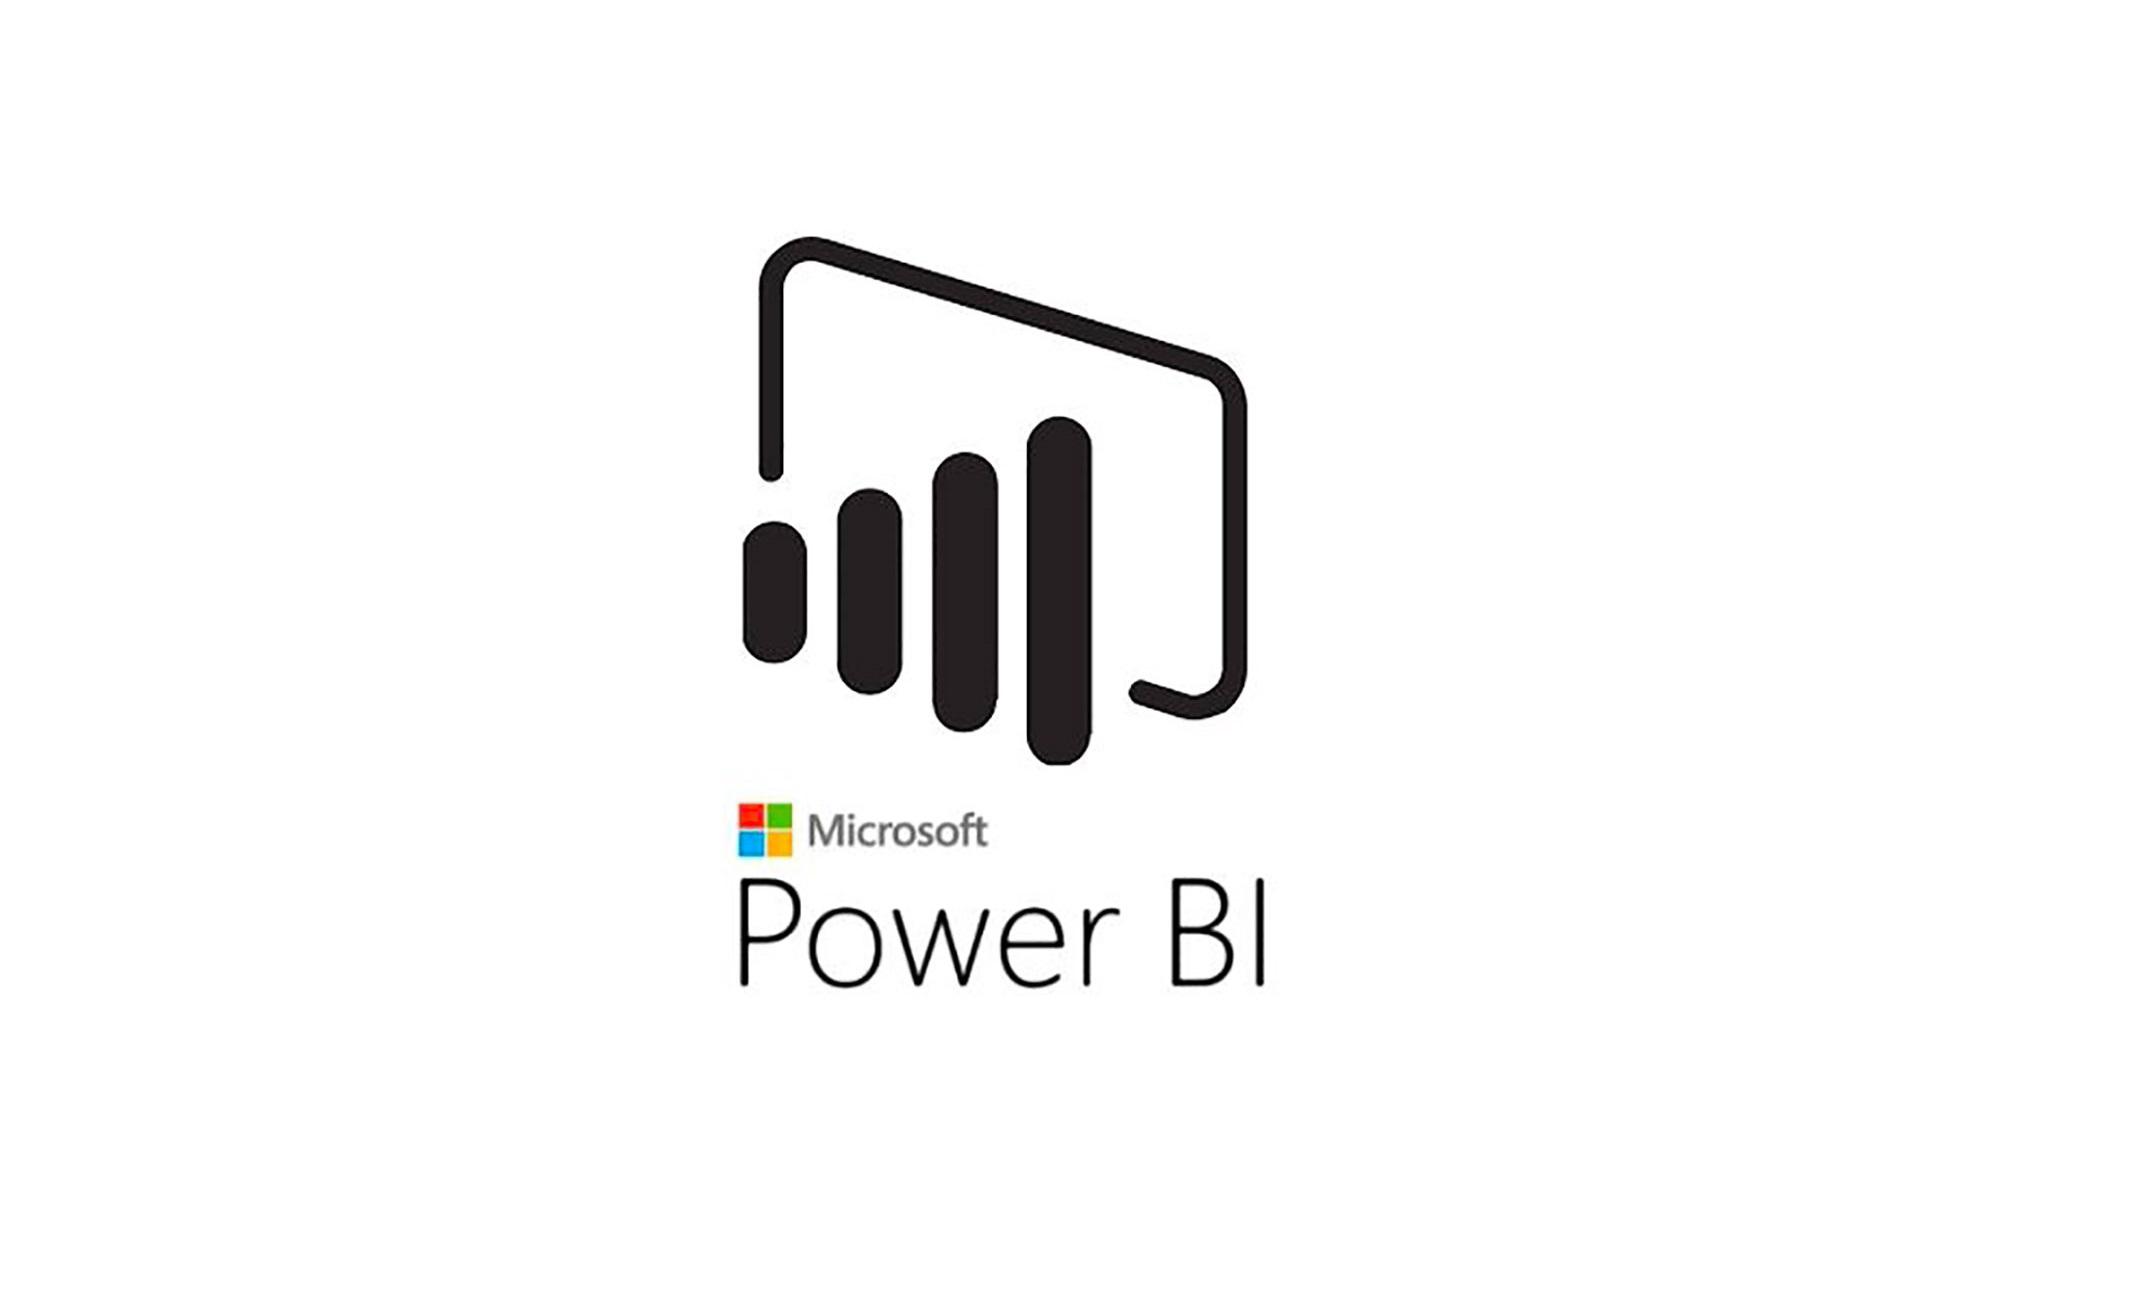 Microsoft Power BI Training in Atlantic City | Introduction to Power BI training for beginners | Getting started with Power BI | What is Power BI | January 20, 2020 - February 12, 2020